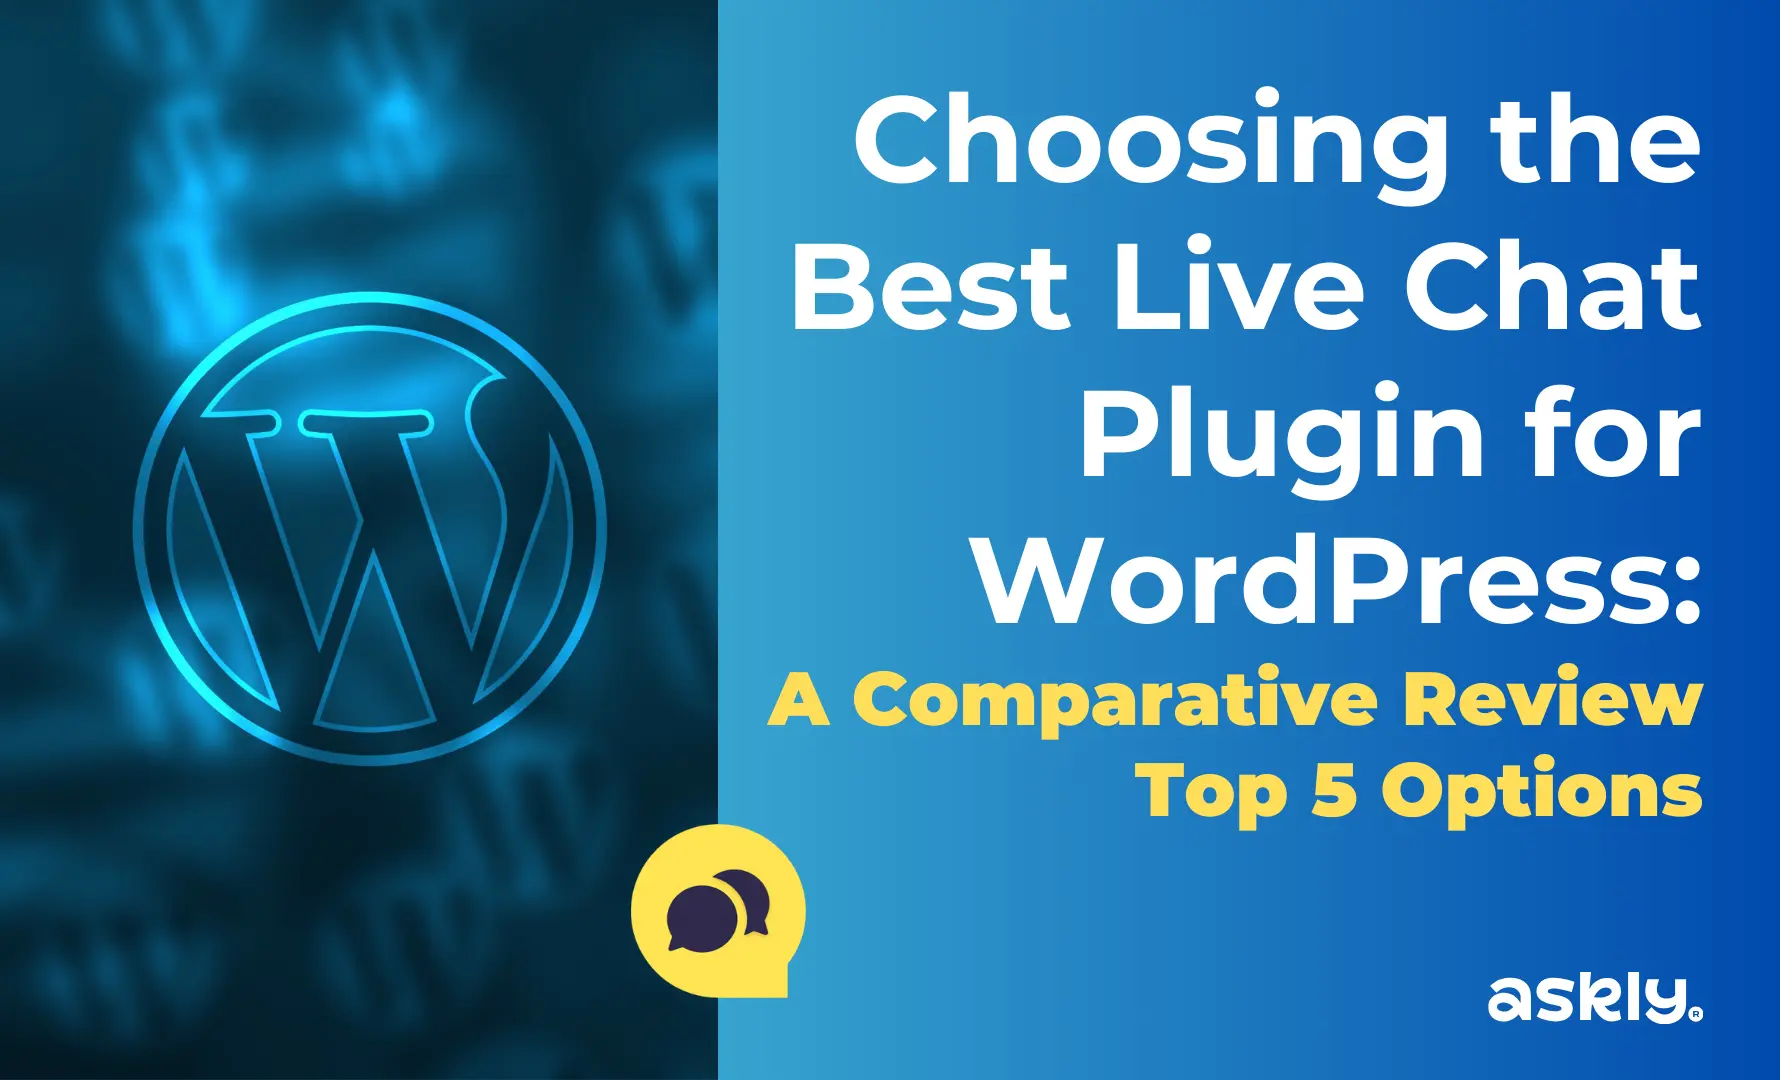 Choosing the Best Live Chat Plugin for WordPress: A Comparative Review of the Top 5 Options